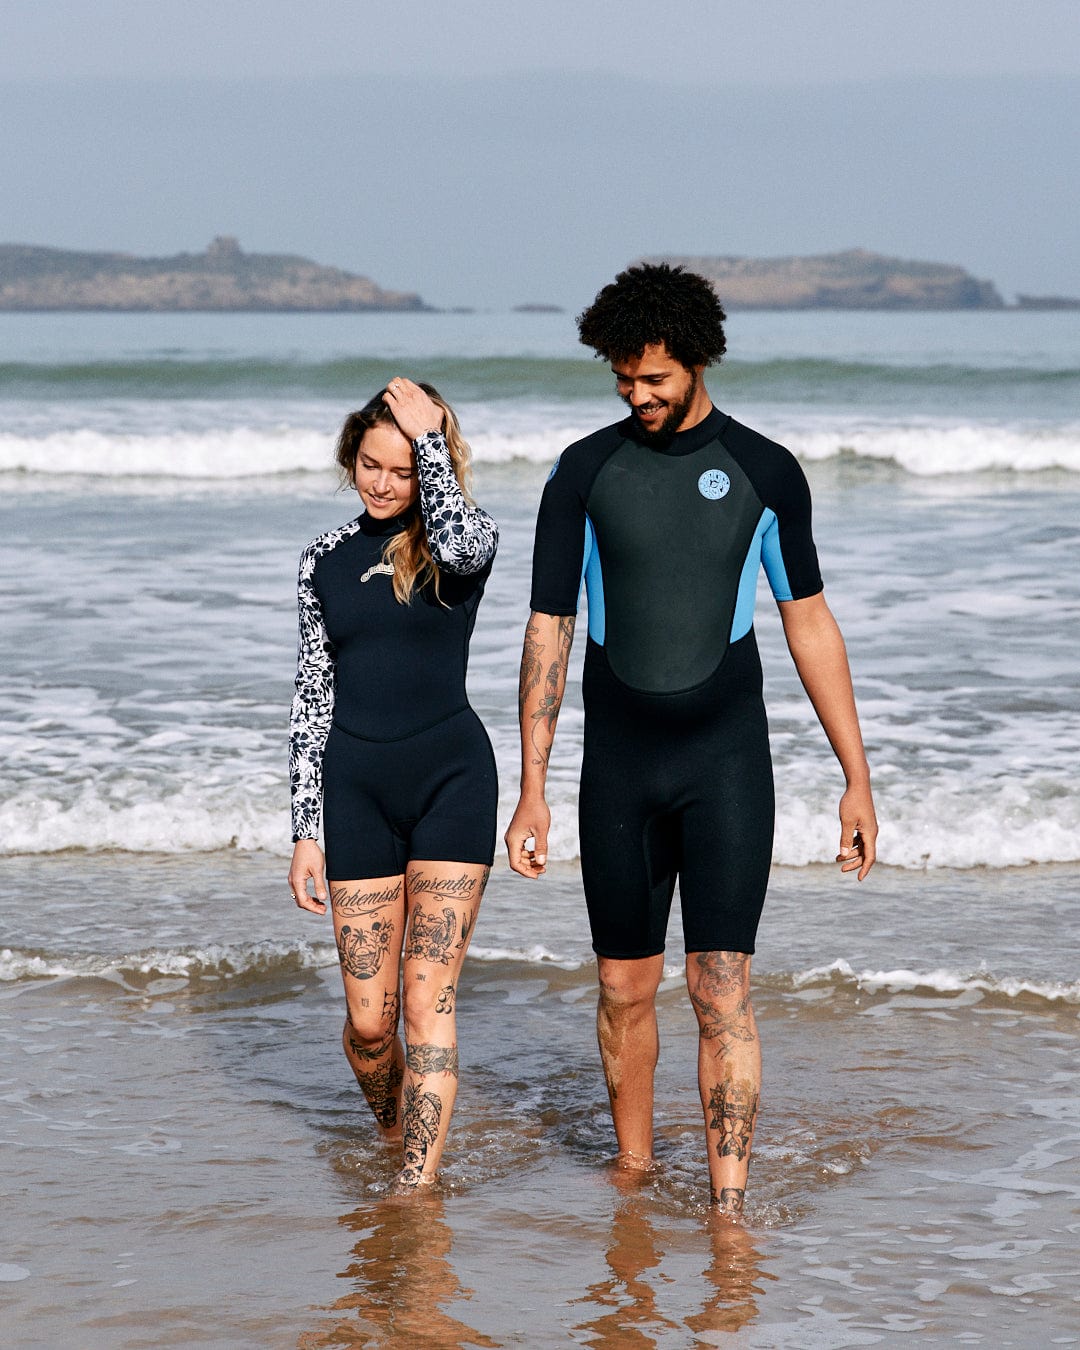 A man and a woman in Saltrock neoprene wetsuits walking hand in hand along a beach, both tattooed, with a clear sky and distant islands in the background.